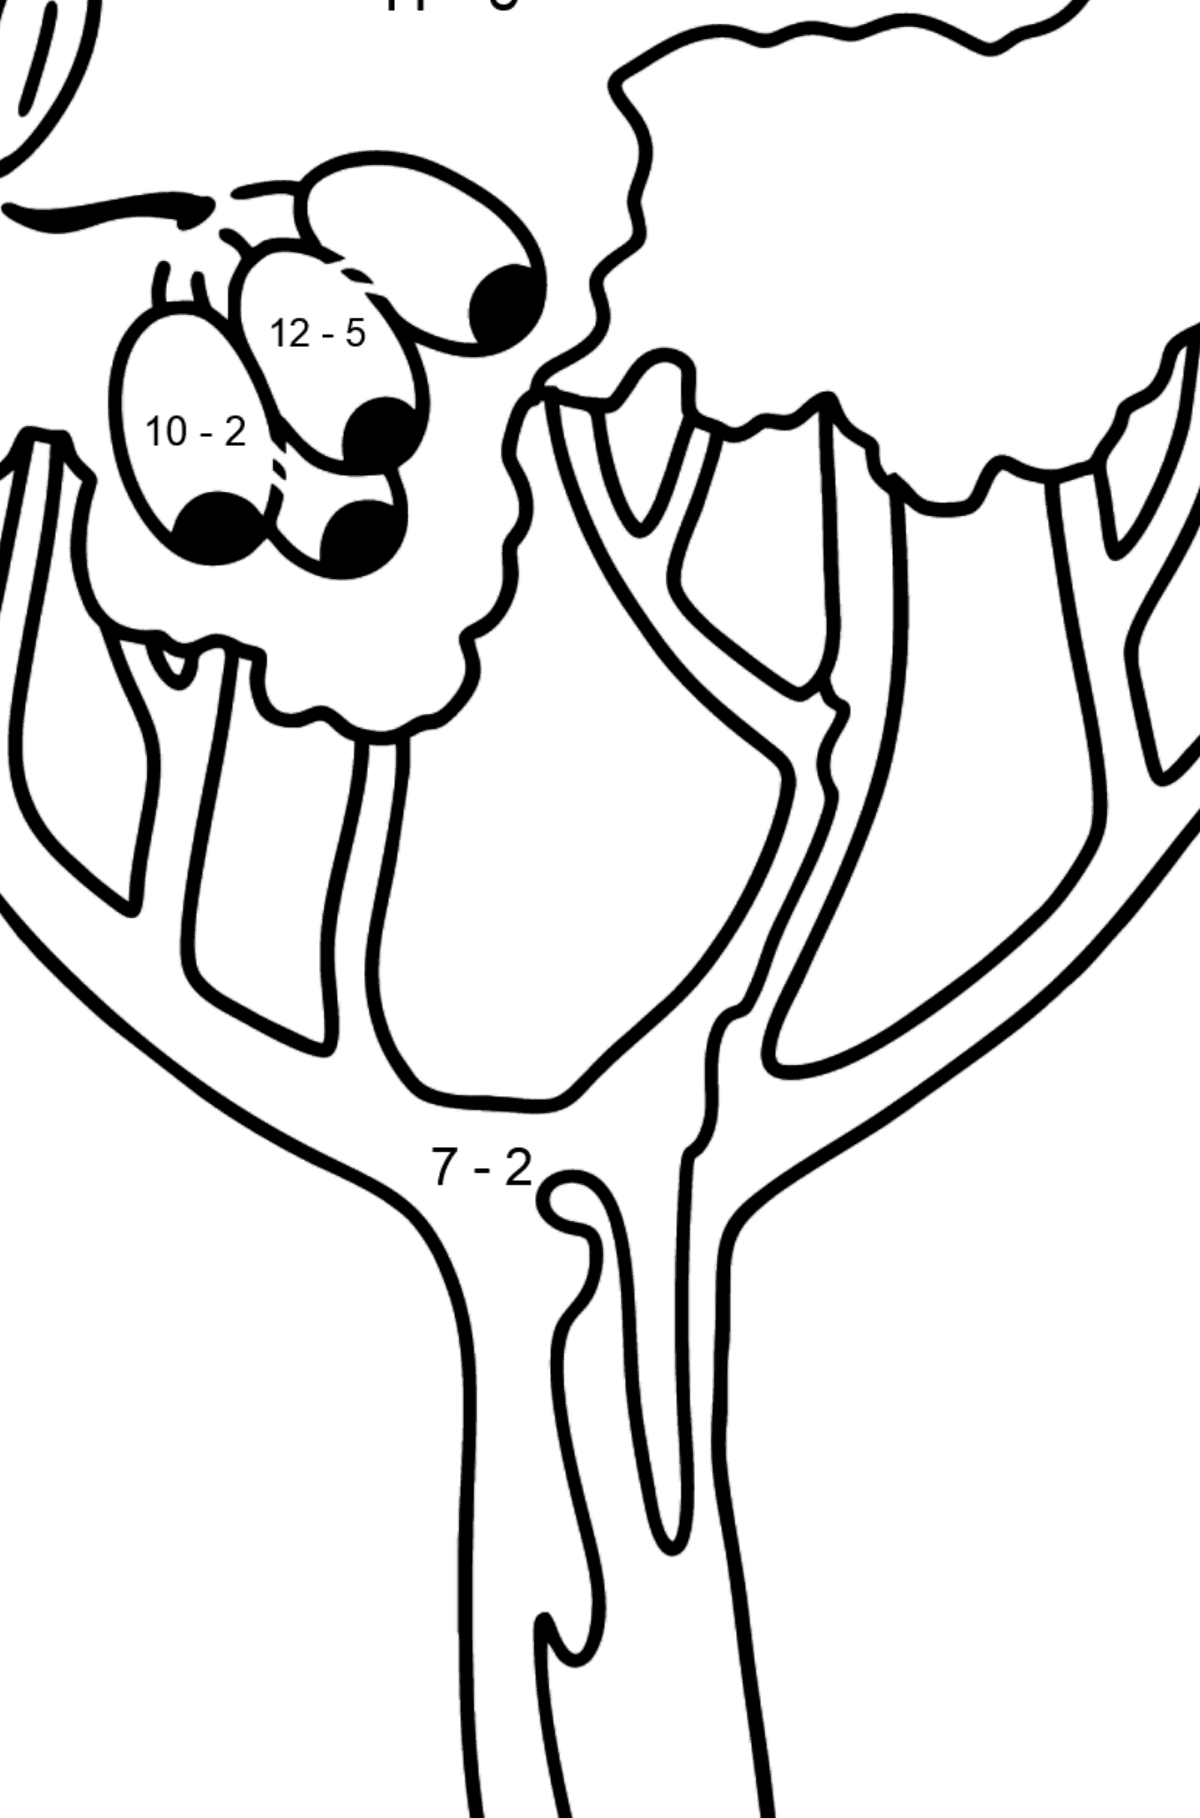 Gum tree - Corimbia coloring page - Math Coloring - Subtraction for Kids